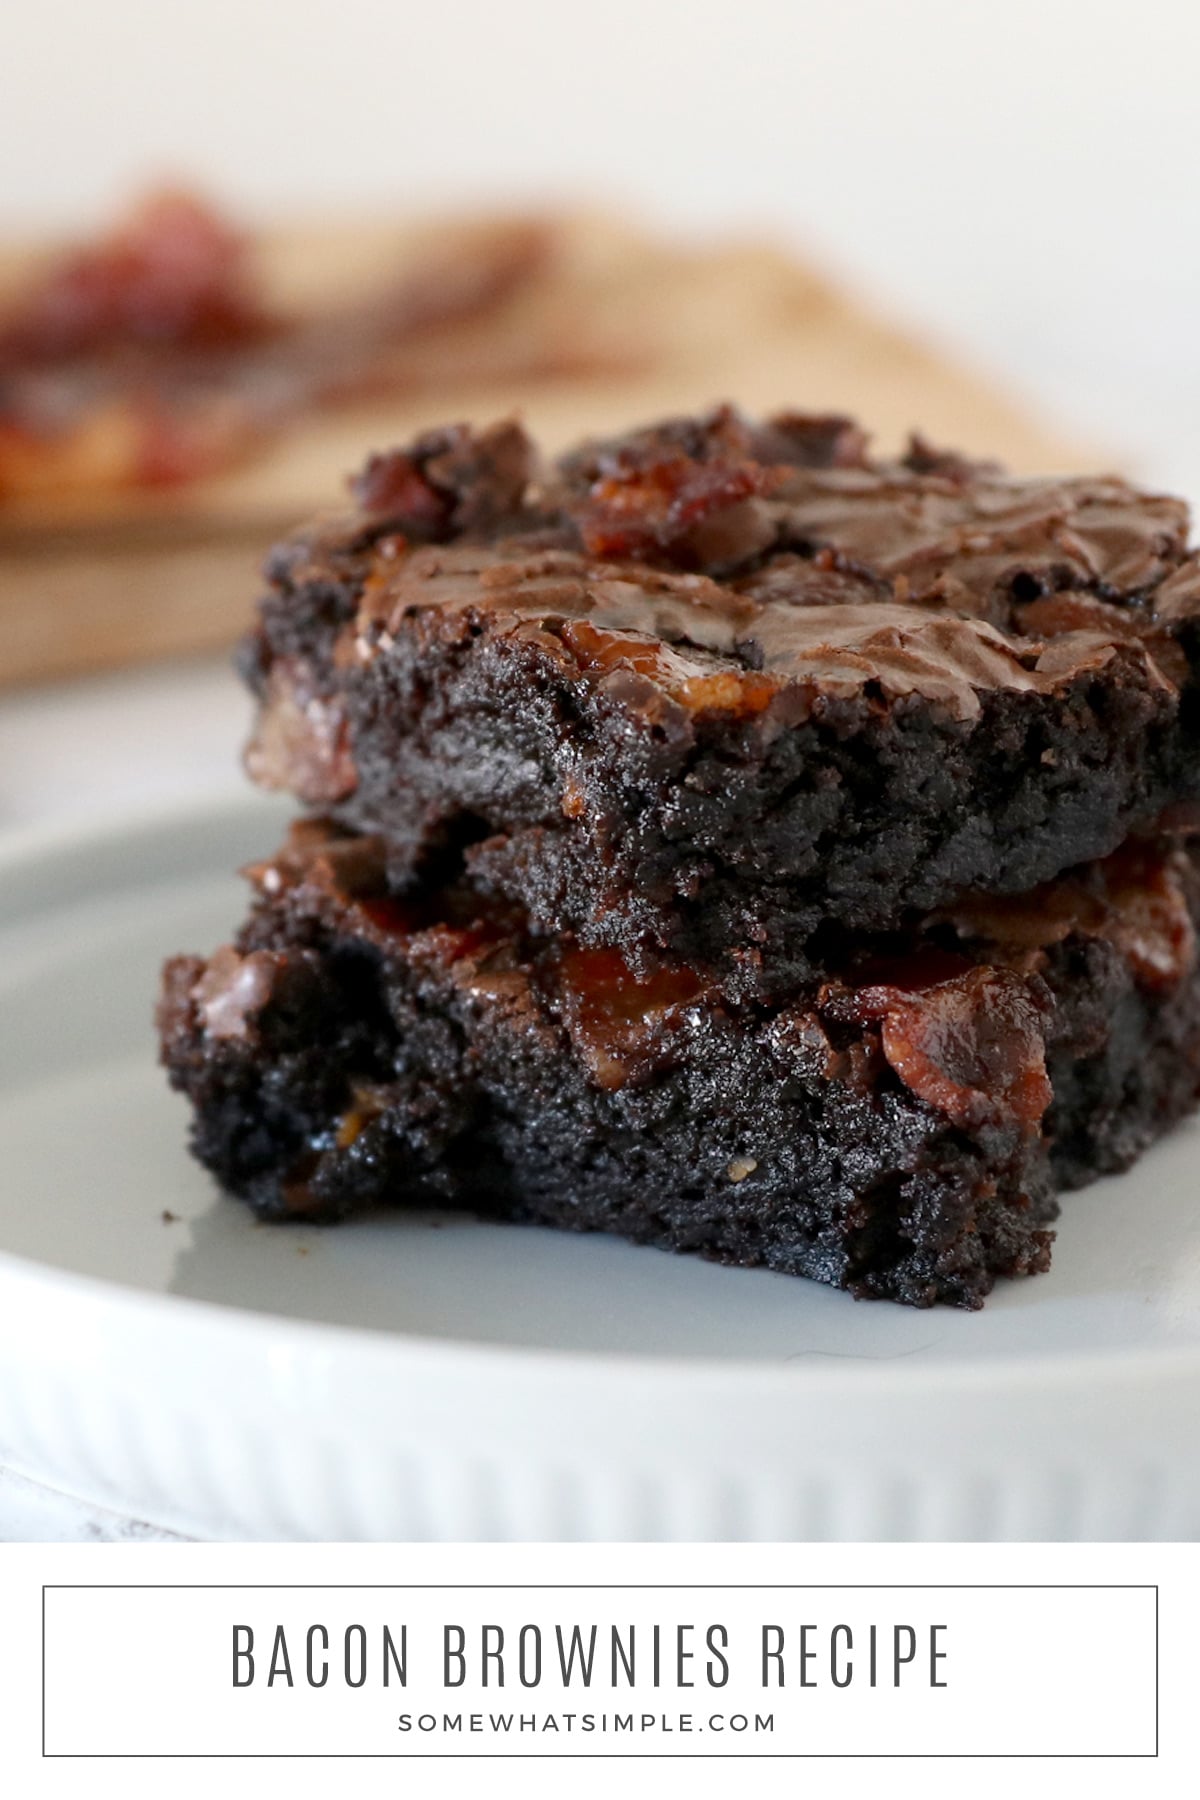 Bacon Brownies are a delicious dessert that doesn't take a lot of time in the kitchen. They're perfectly sweet and salty and will make a great addition to any party menu. via @somewhatsimple